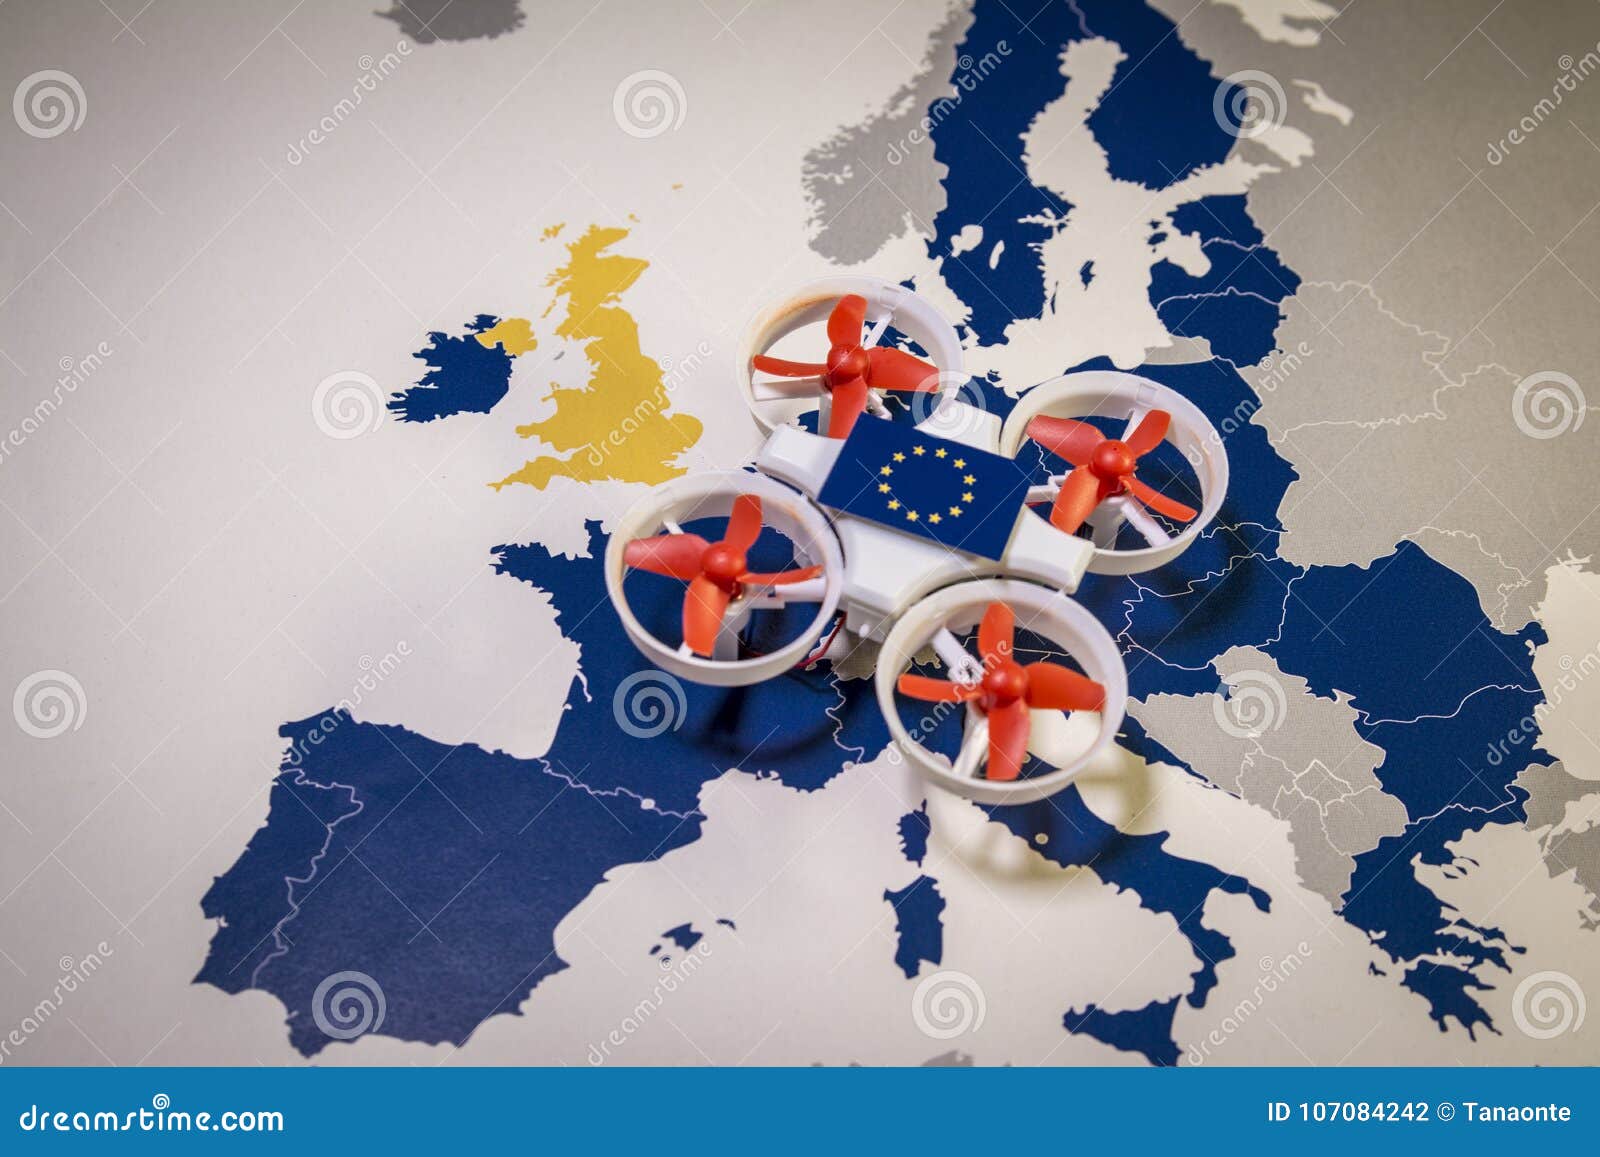 Mini Drone Flying a EU Map. European Rules for Drone Aerial Aircraft Law Stock Photo - Image of hovering, europe: 107084242